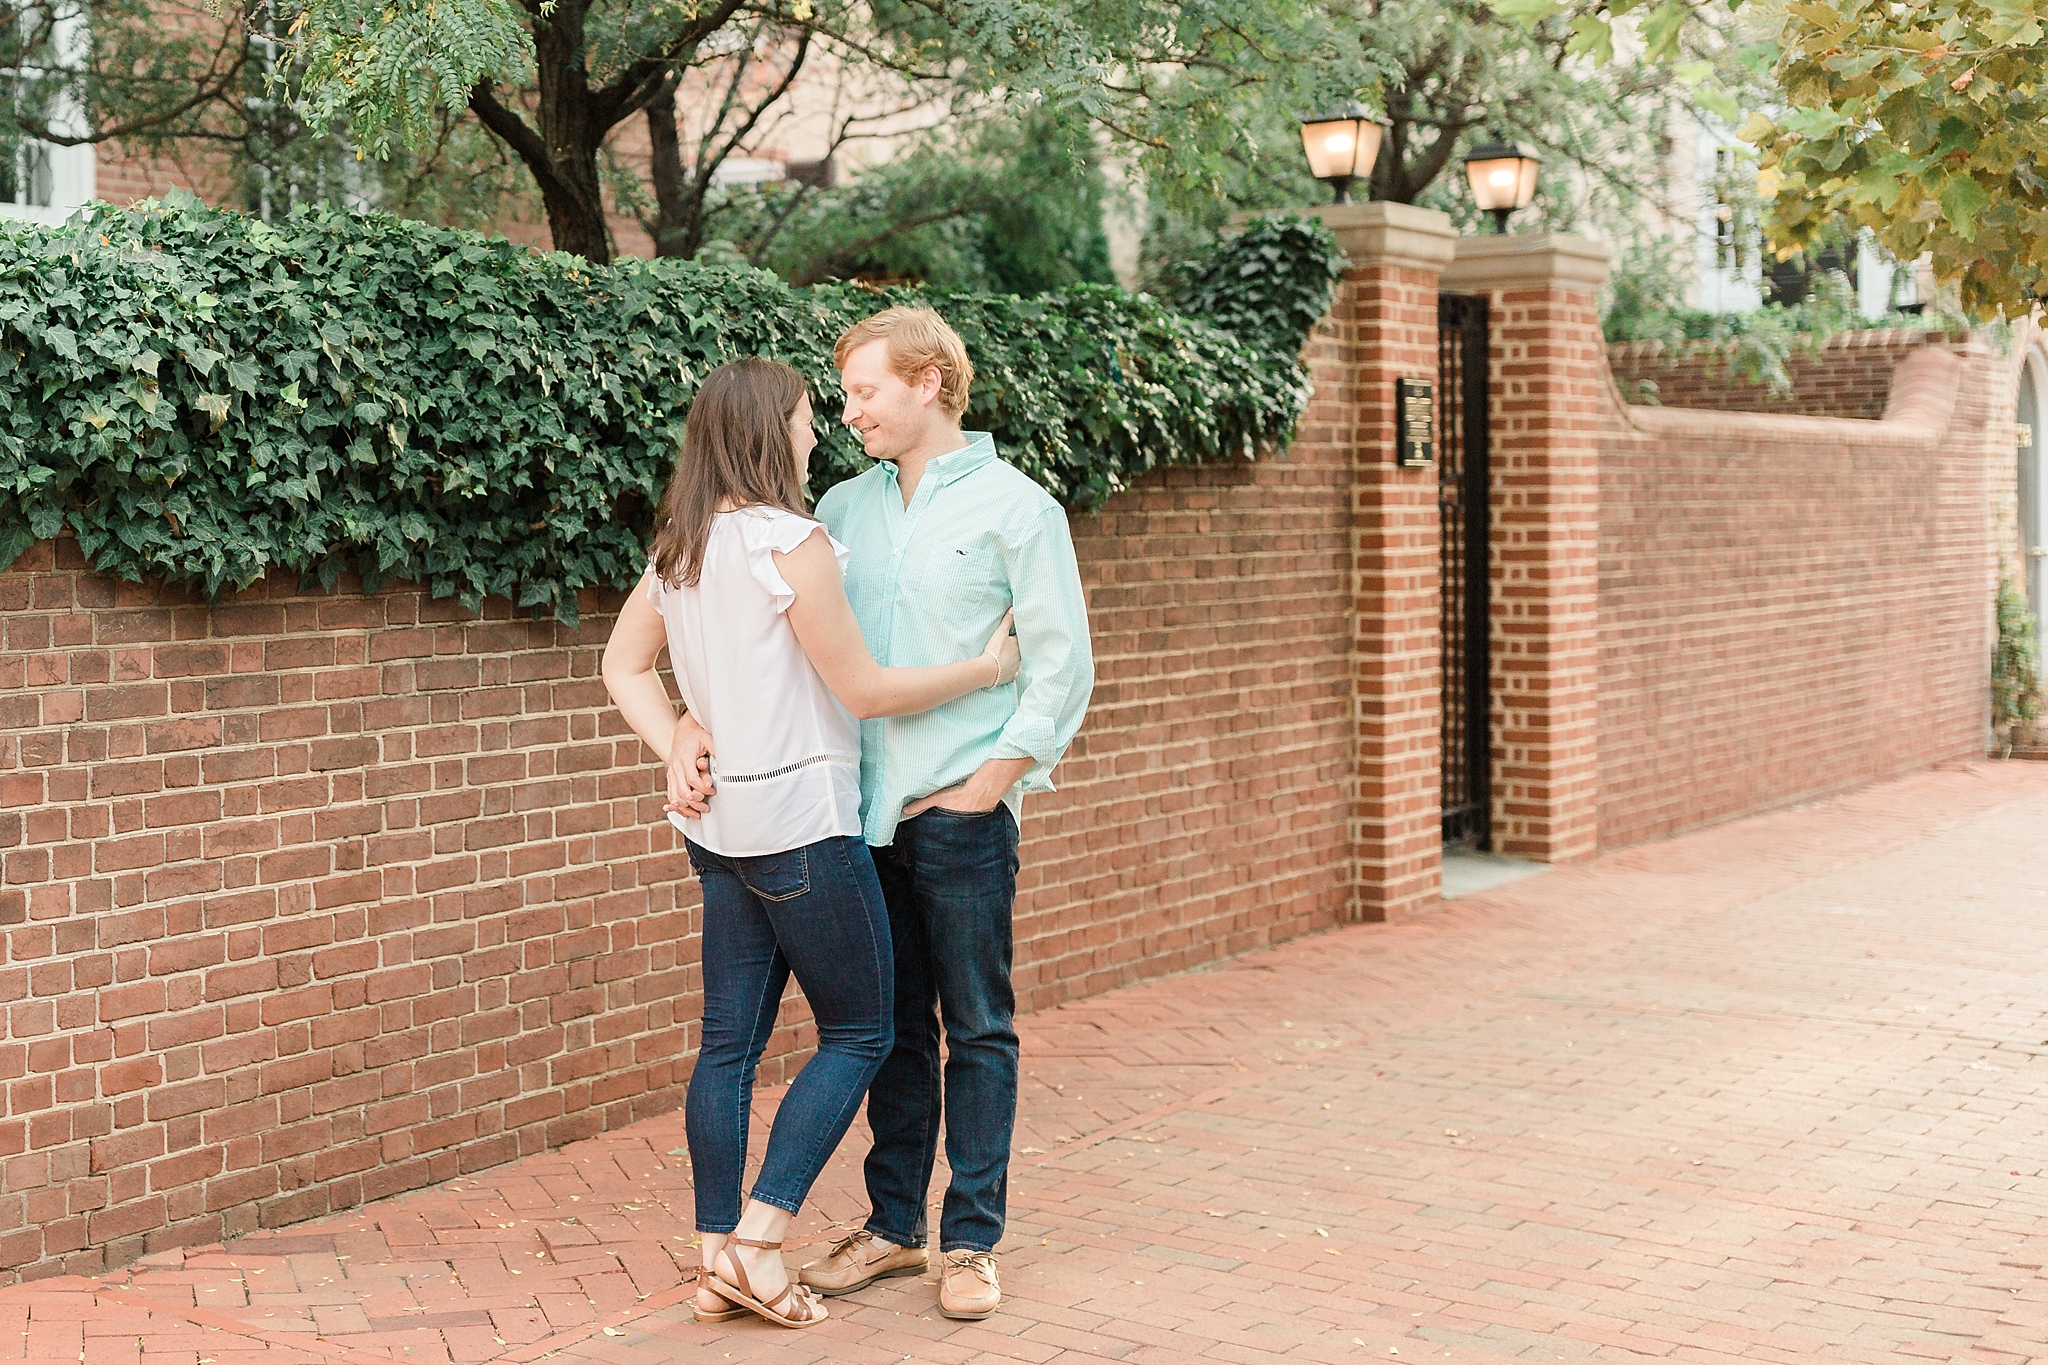 A romantic engagement session at Washington National Cathedral in DC is full of love, laughter, and lots of lush florals from the Bishop's Garden!